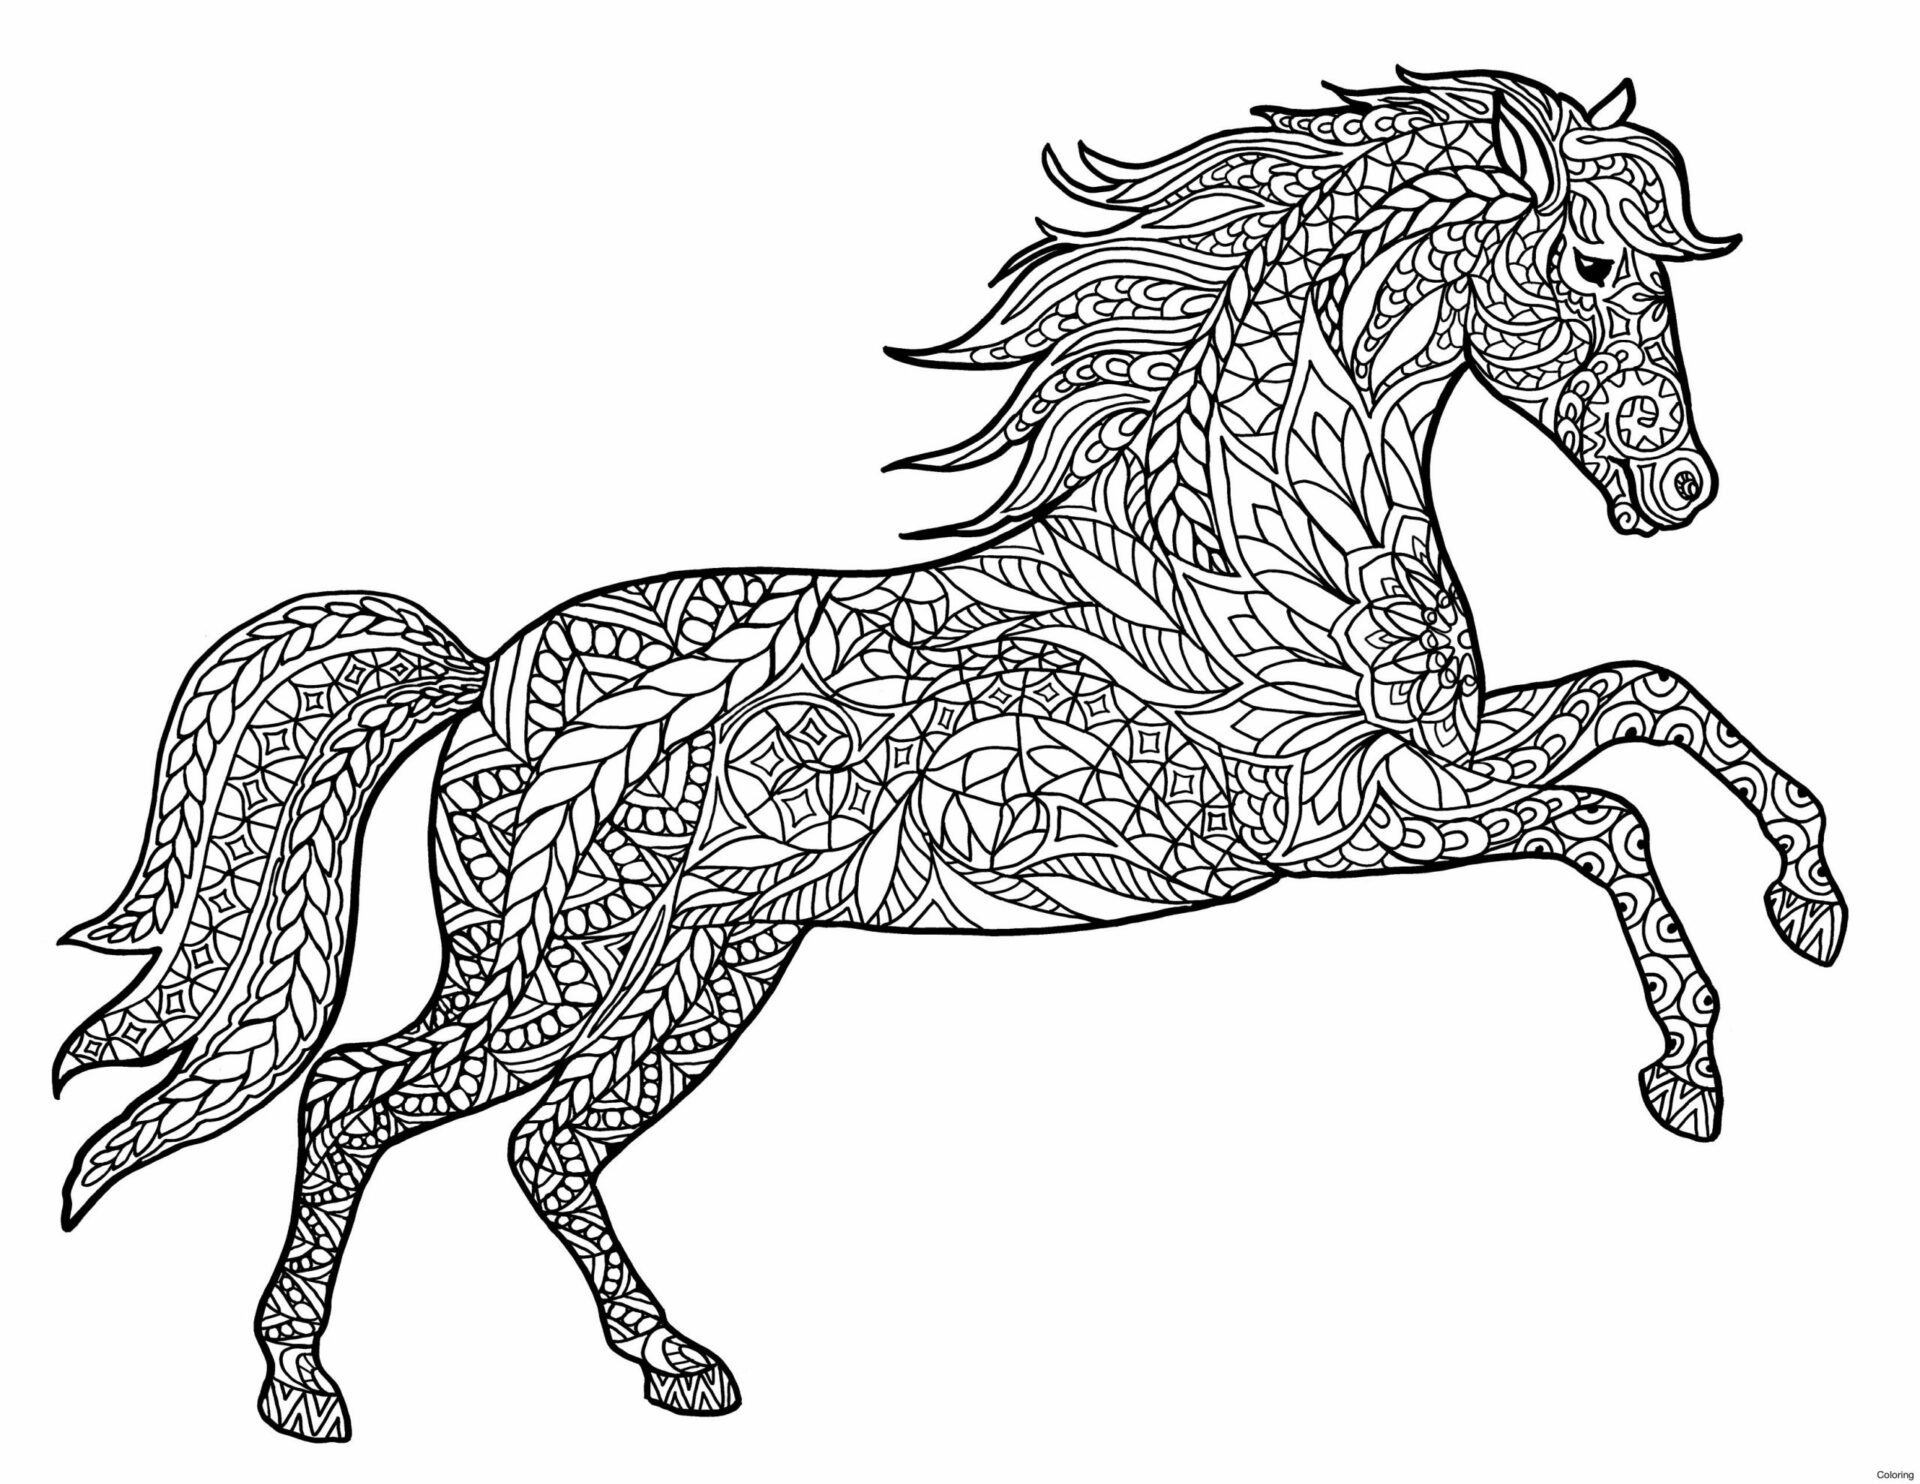 Printable Pages. Coloring Sheets PDF Horses Mandala Coloring Pages For Kids